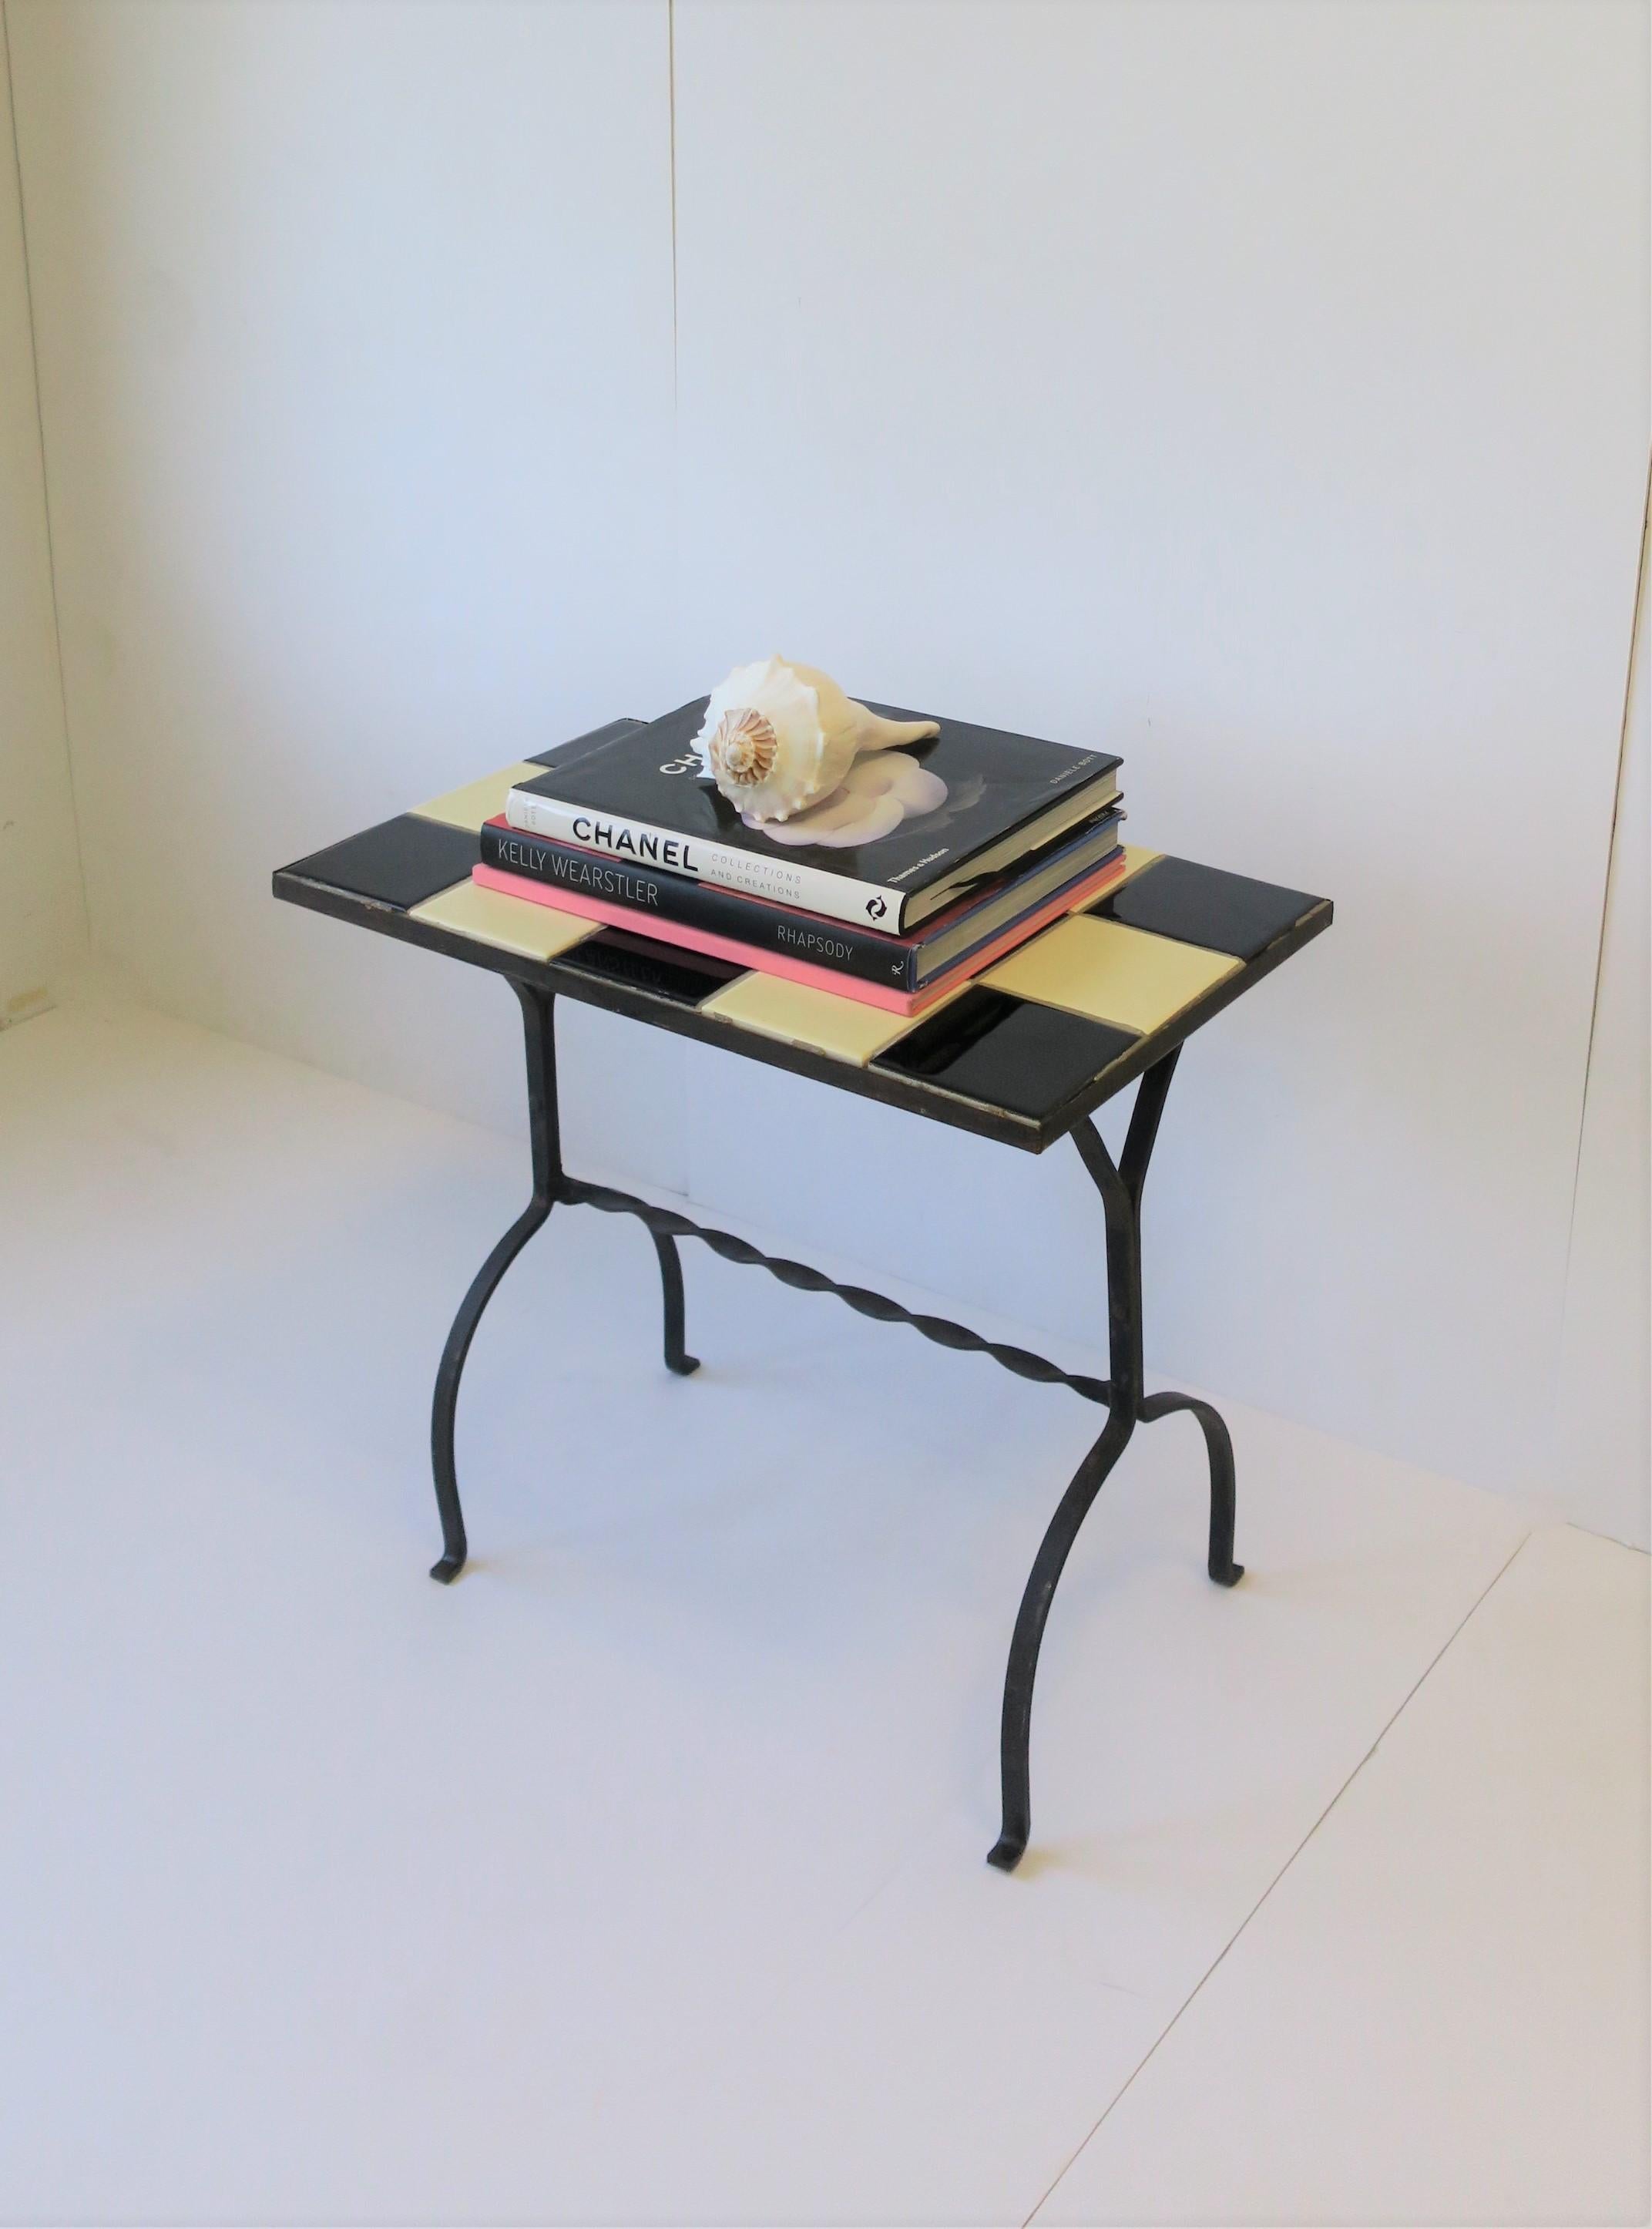 A Mid-Century Modern rectangular black and white ceramic mosaic tile end, side, or drinks table, circa mid-20th century. Table has a black metal frame with black and white ceramic tile top. Table offers a great look with its alternating black and